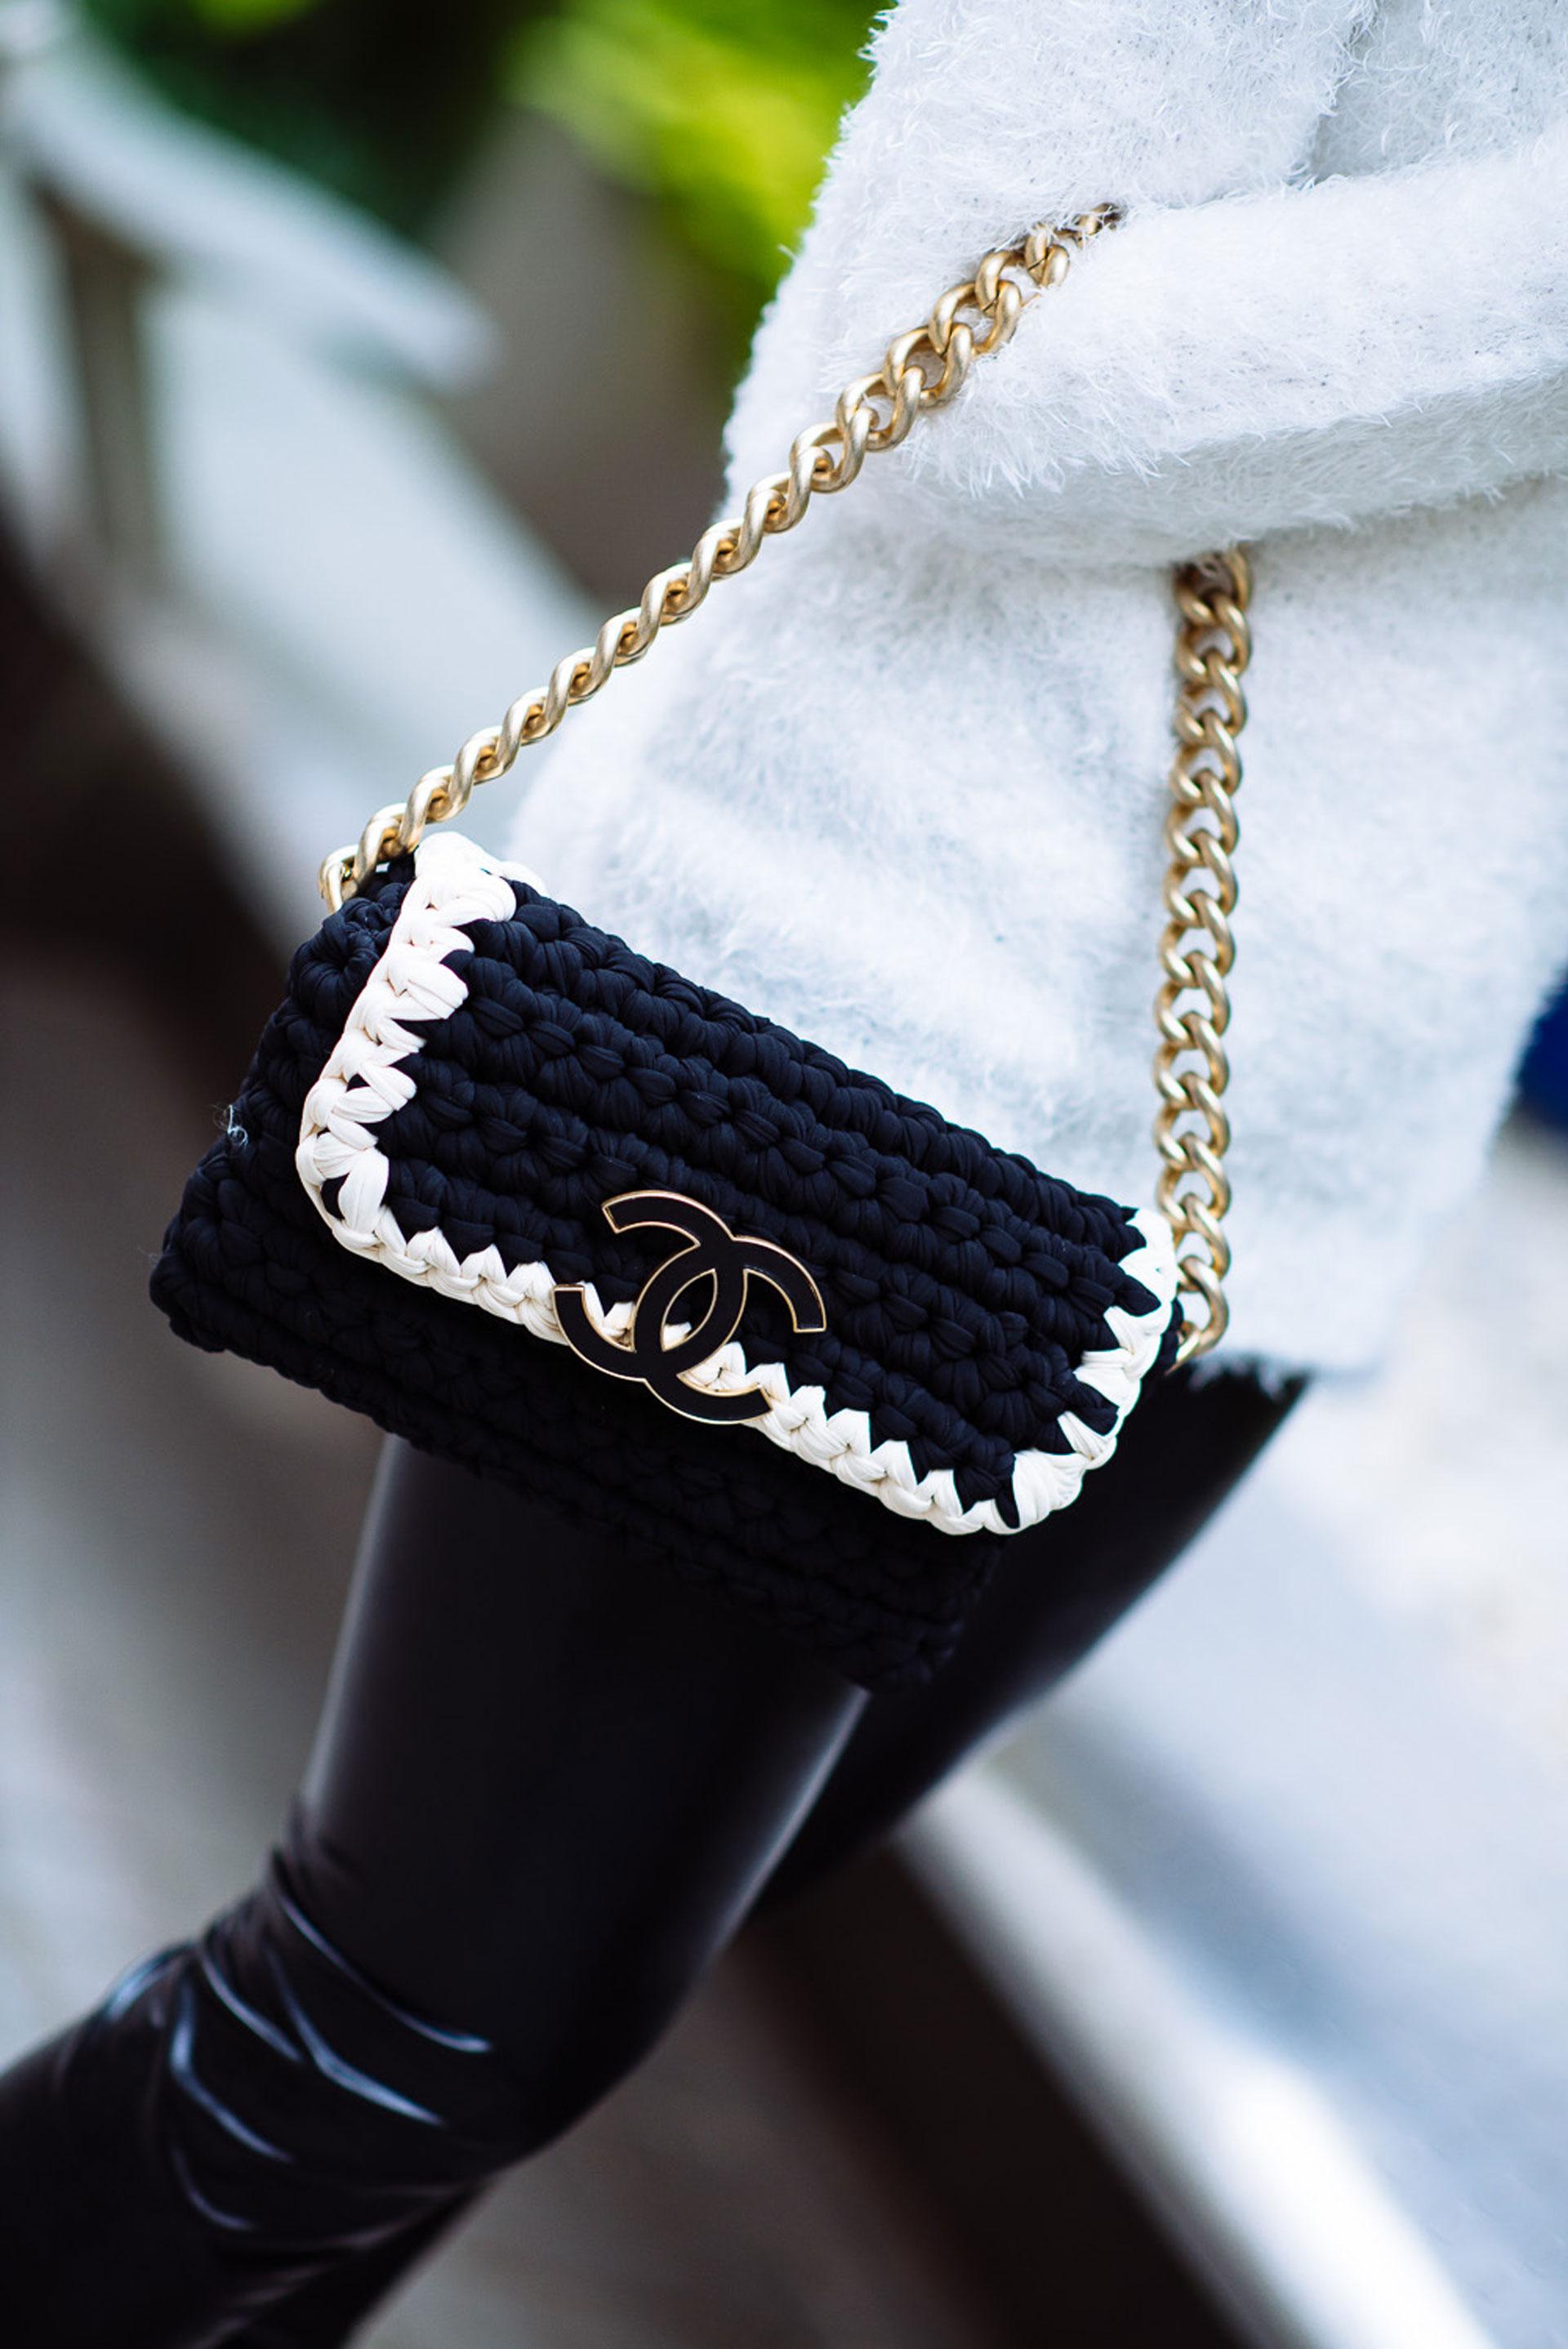 Chanel Interwoven Woven Crochet Bicolor Two Tone Medium Black & White Flap Bag

Chanel Shoulder Bag
Black Interwoven
Gold-Tone Hardware
Chain-Link Shoulder Strap
Twill Lining & Dual Interior Pockets
Push-Lock Closure at Front
Includes Dust Bag

Made